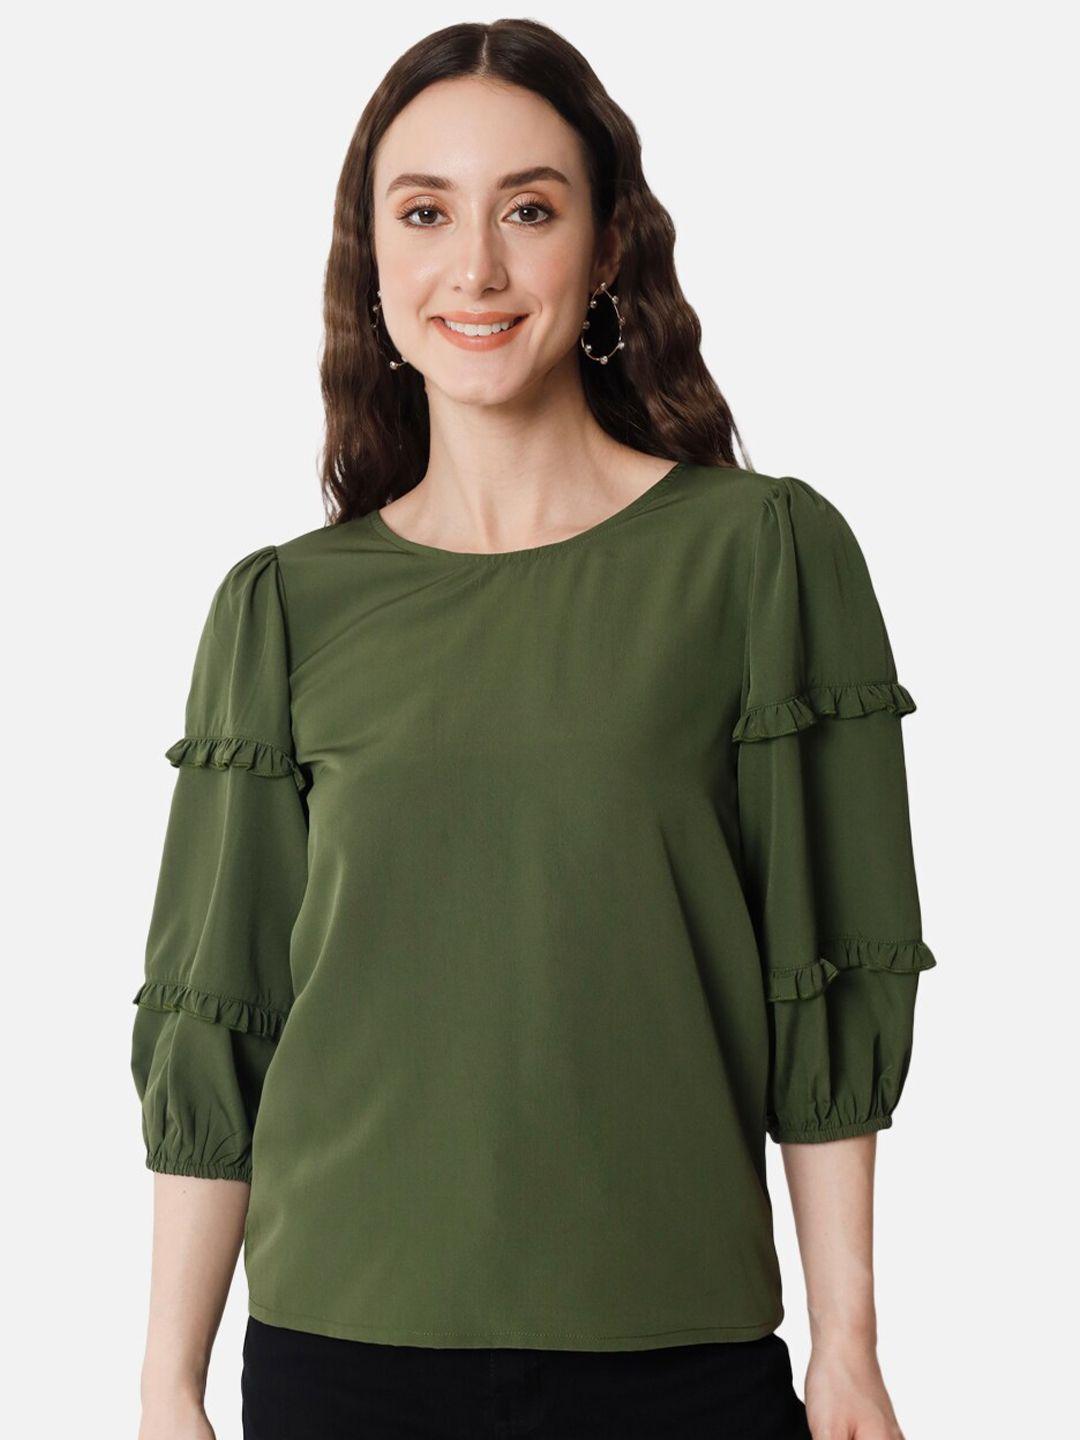 baesd olive green crepe top